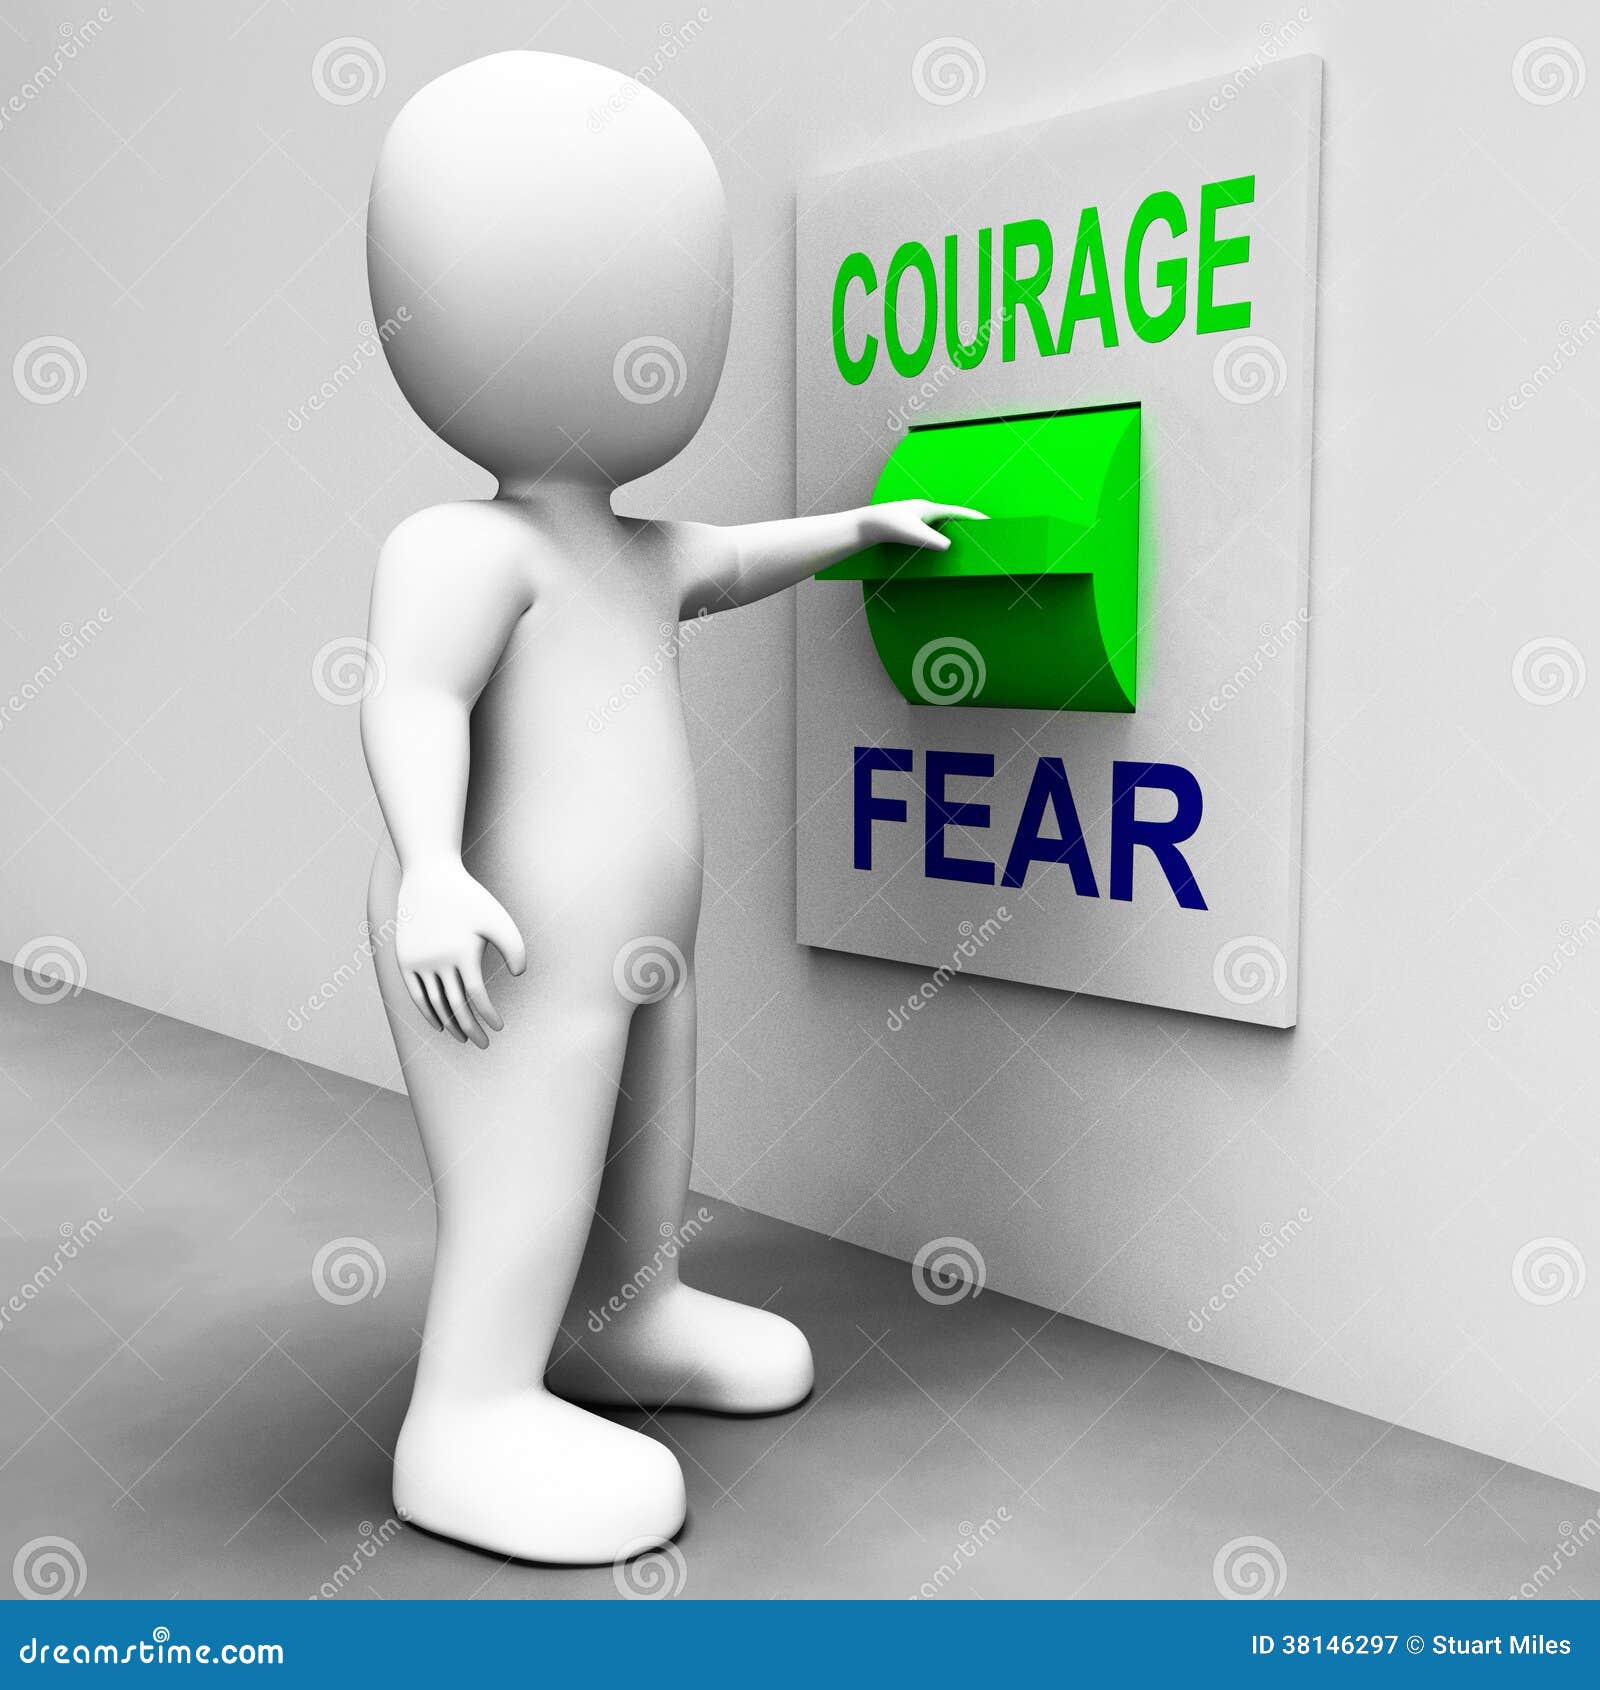 courage fear switch shows afraid or courageous